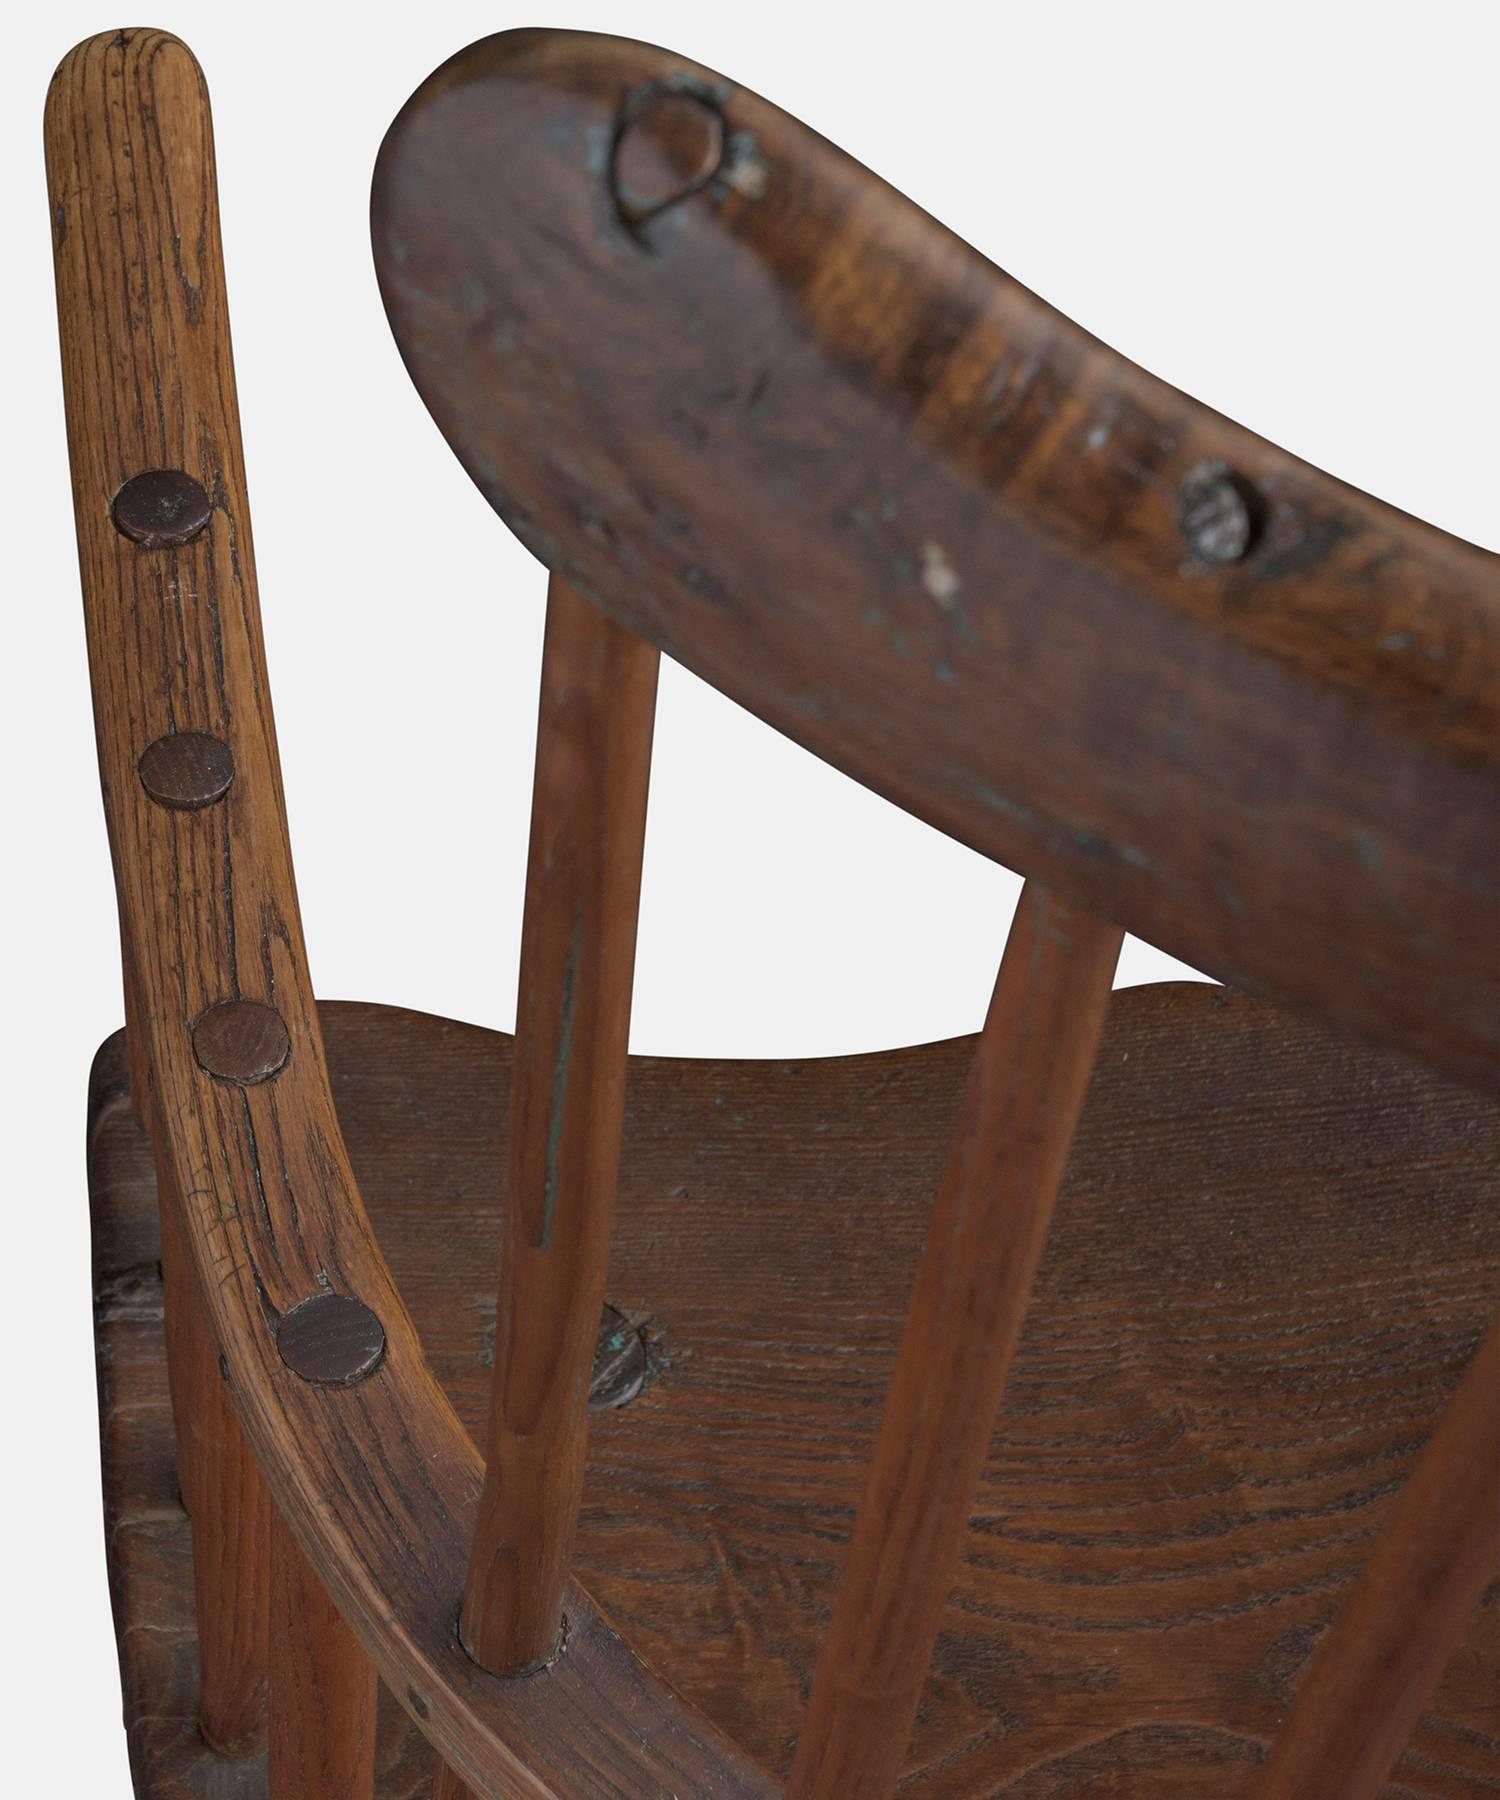 Ash West Country Primitive Windsor Chair, circa 1750